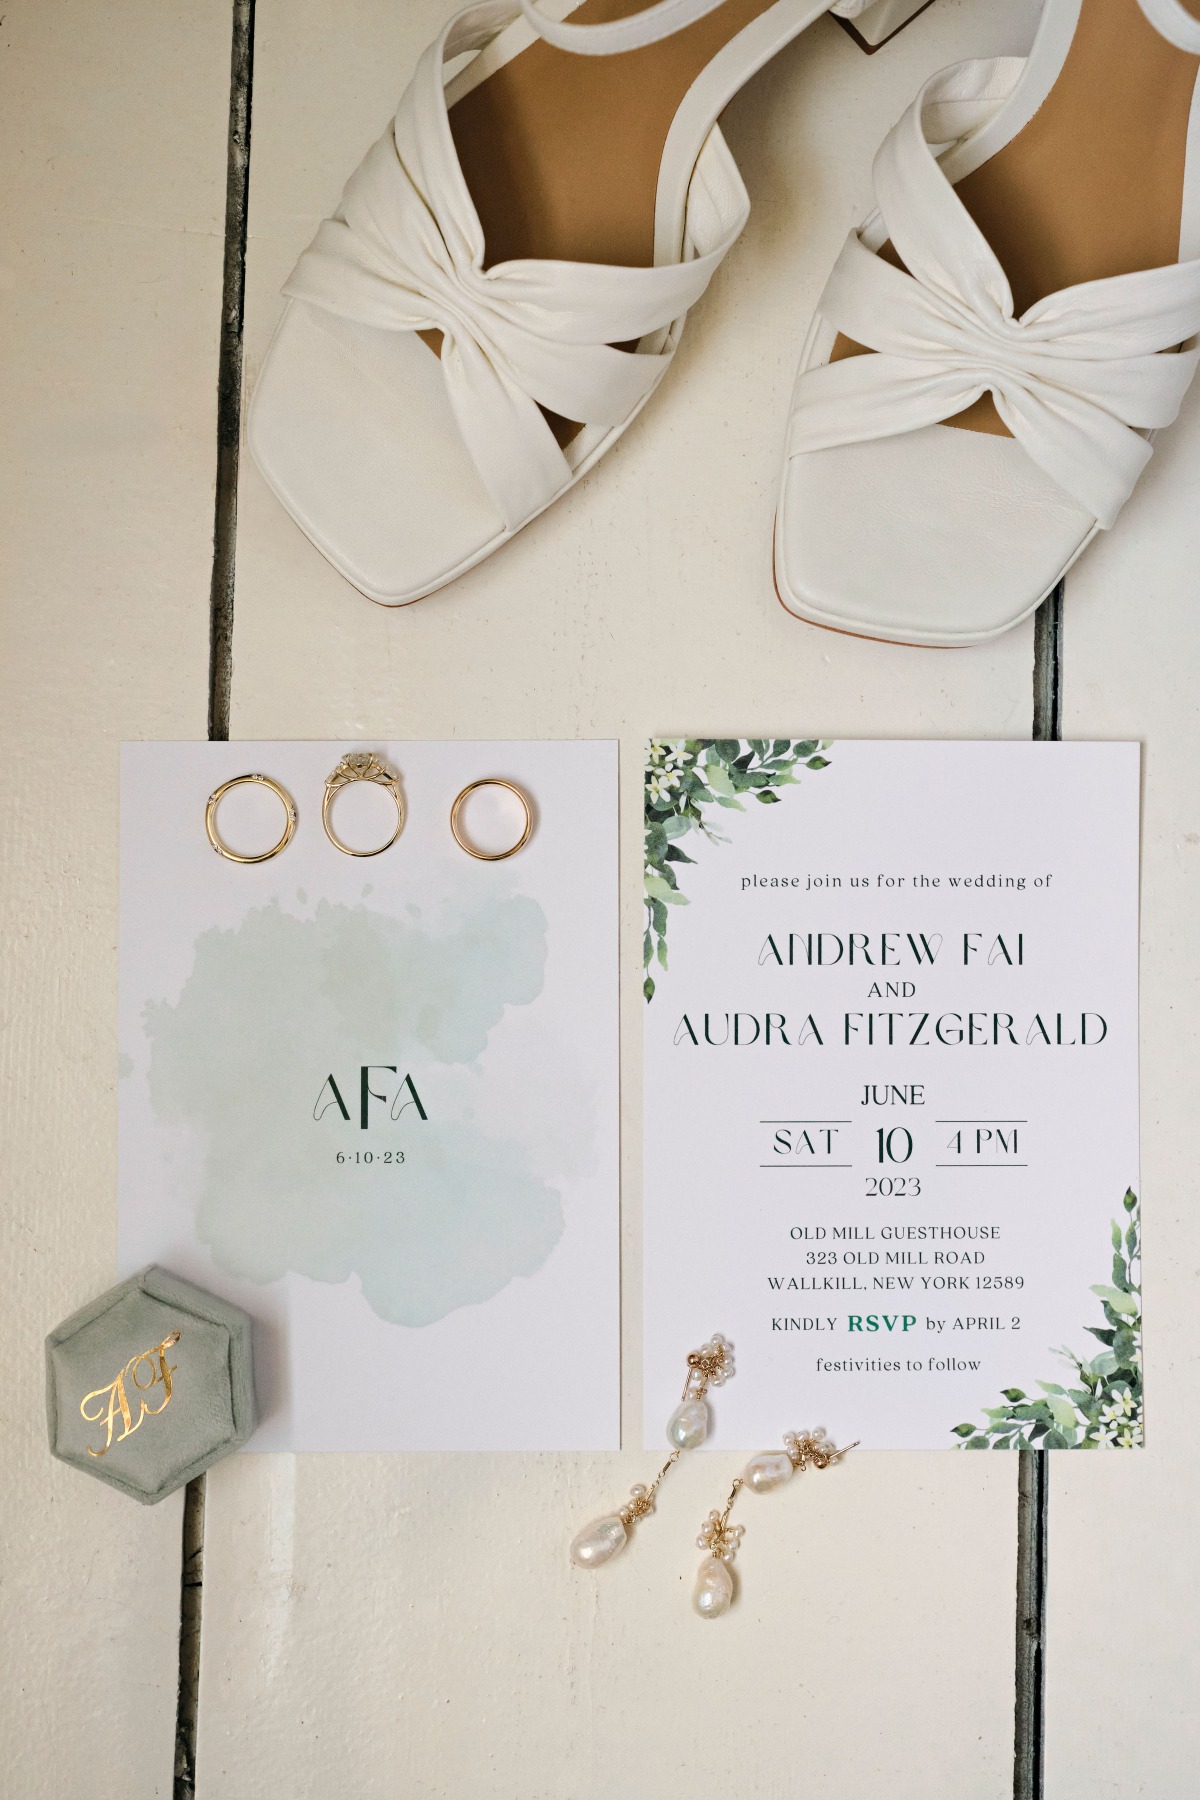 Modern floral and greenery illustrated wedding invitations